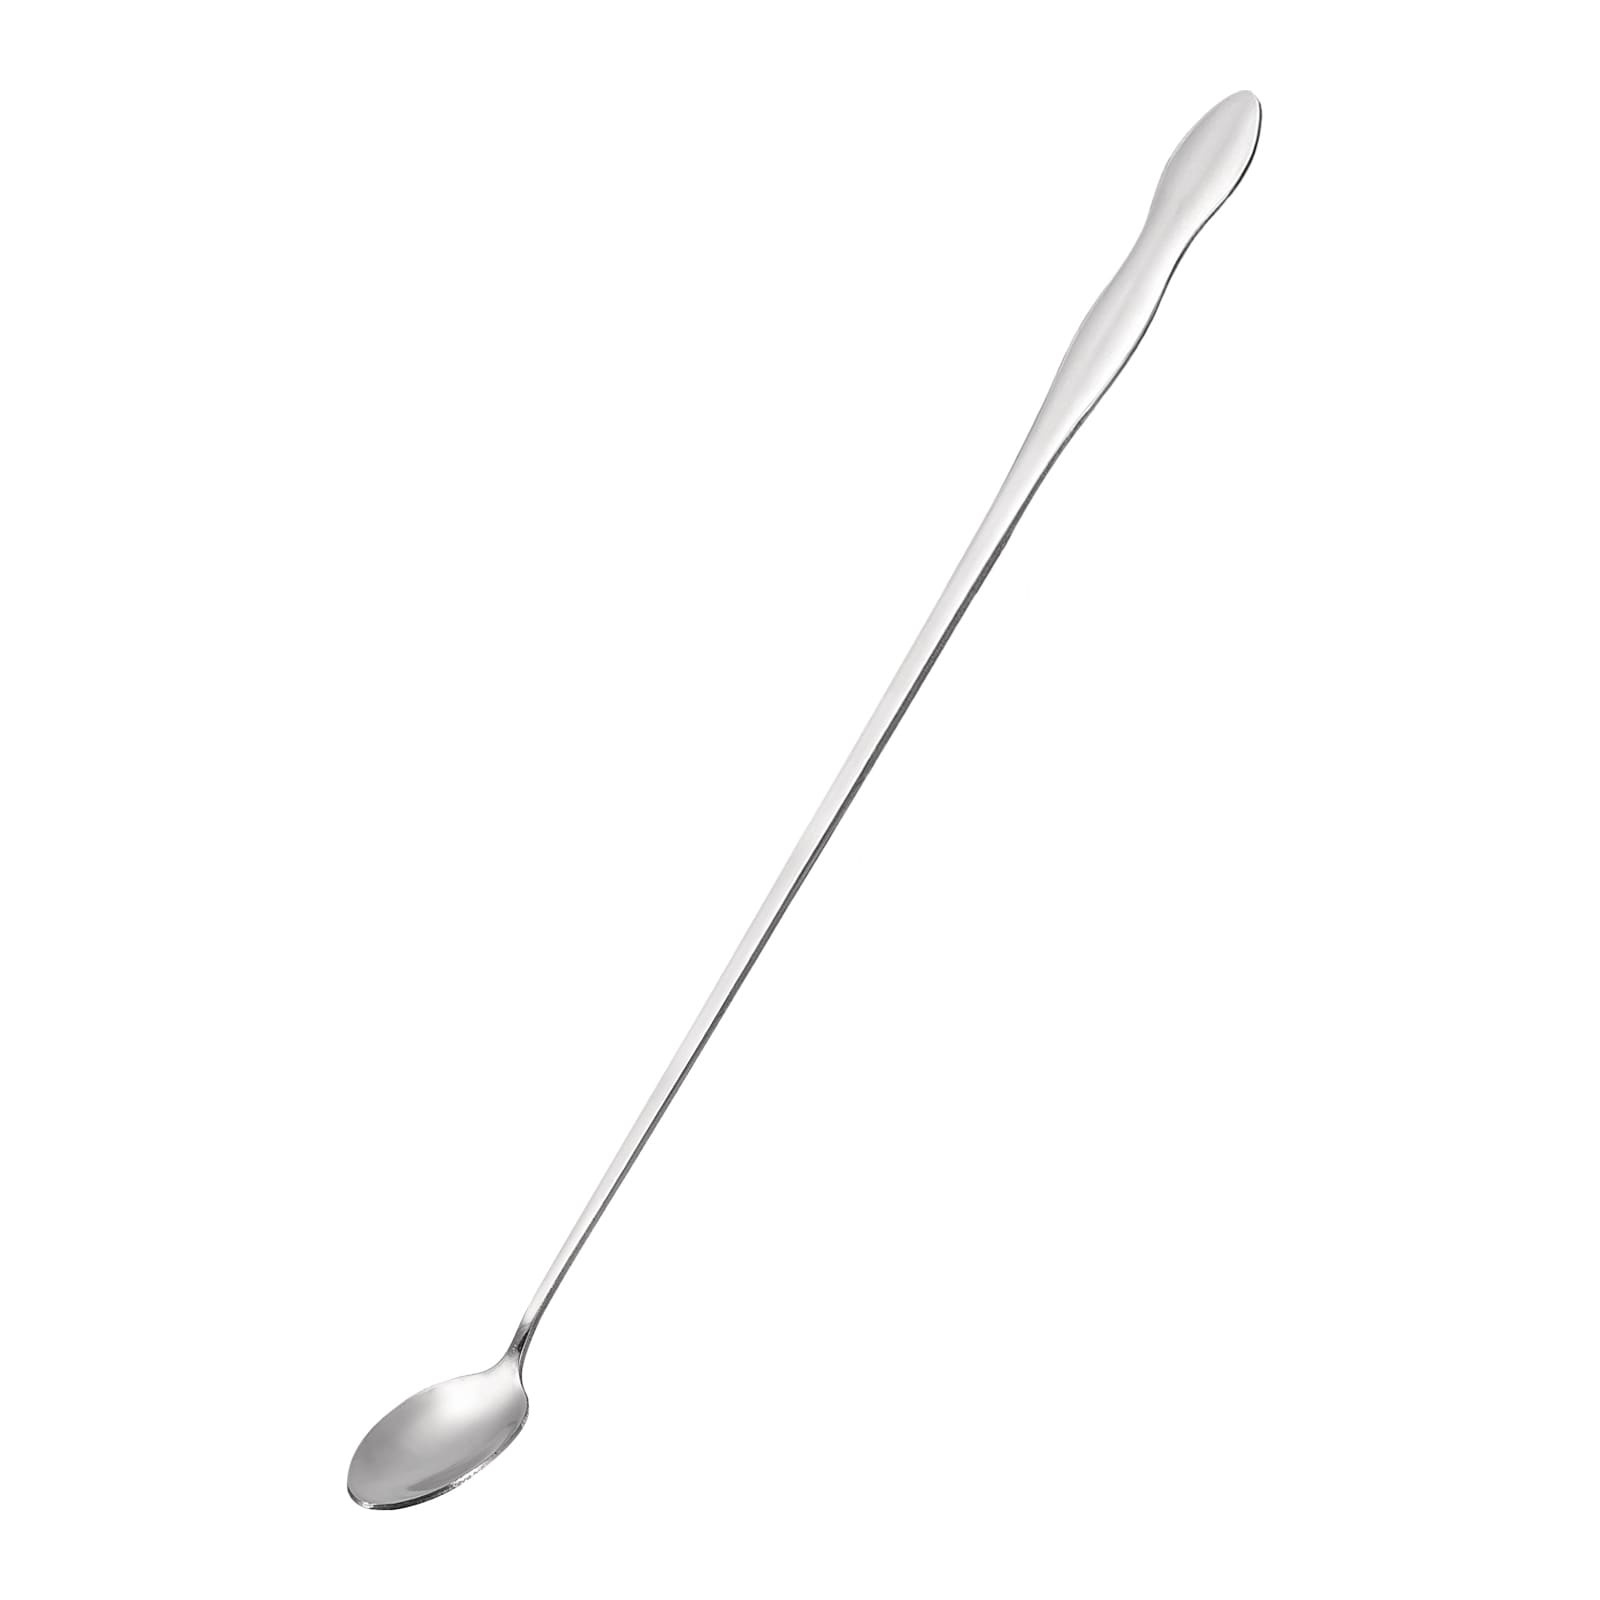 Hand Held Egg Beater, Made of Durable Stainless Steel - Measures 13 Long x  4 Wide, by Home Marketplace